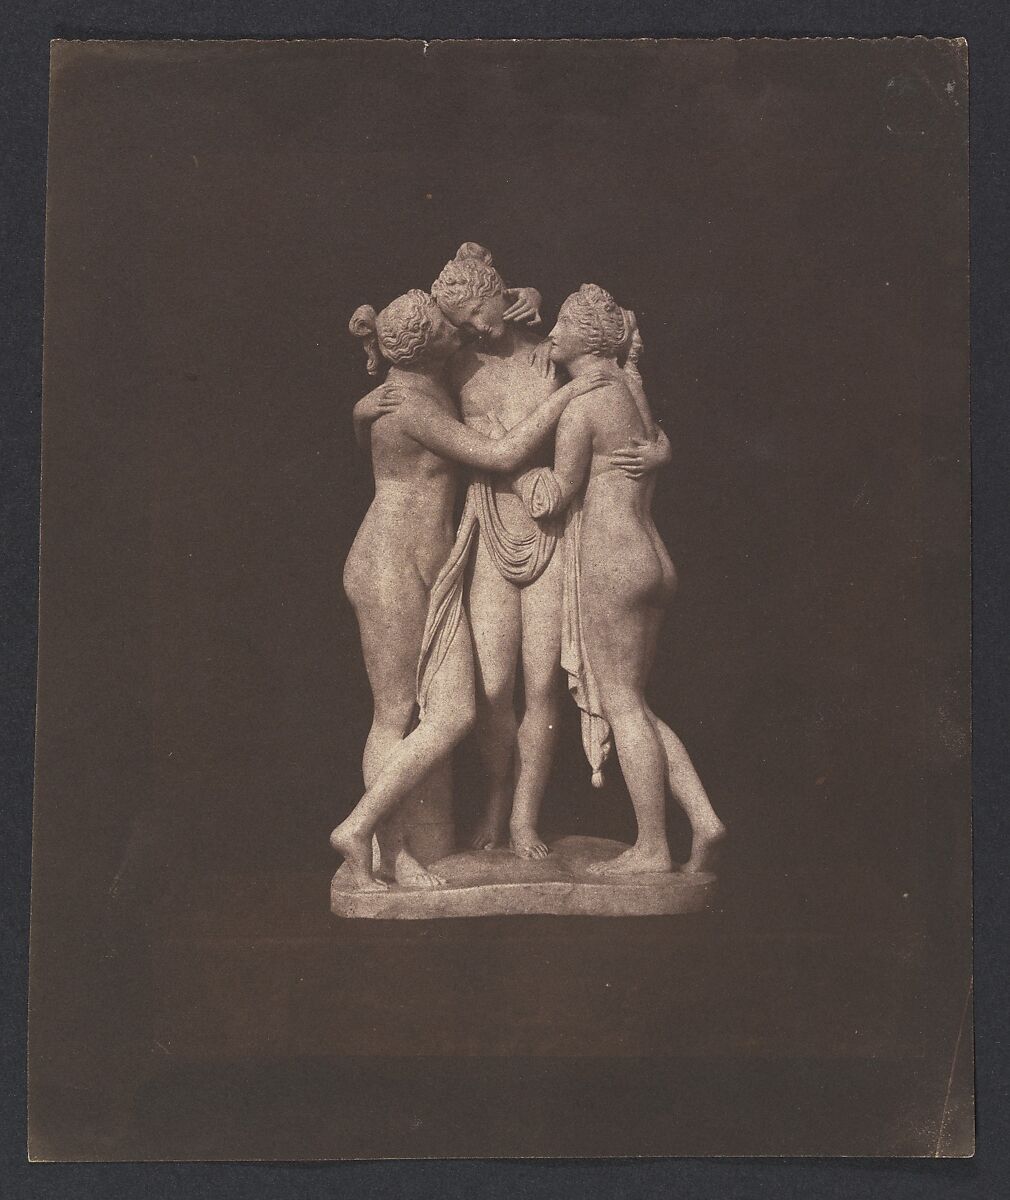 Statuette of the Three Graces, William Henry Fox Talbot (British, Dorset 1800–1877 Lacock), Salted paper print from paper negative 